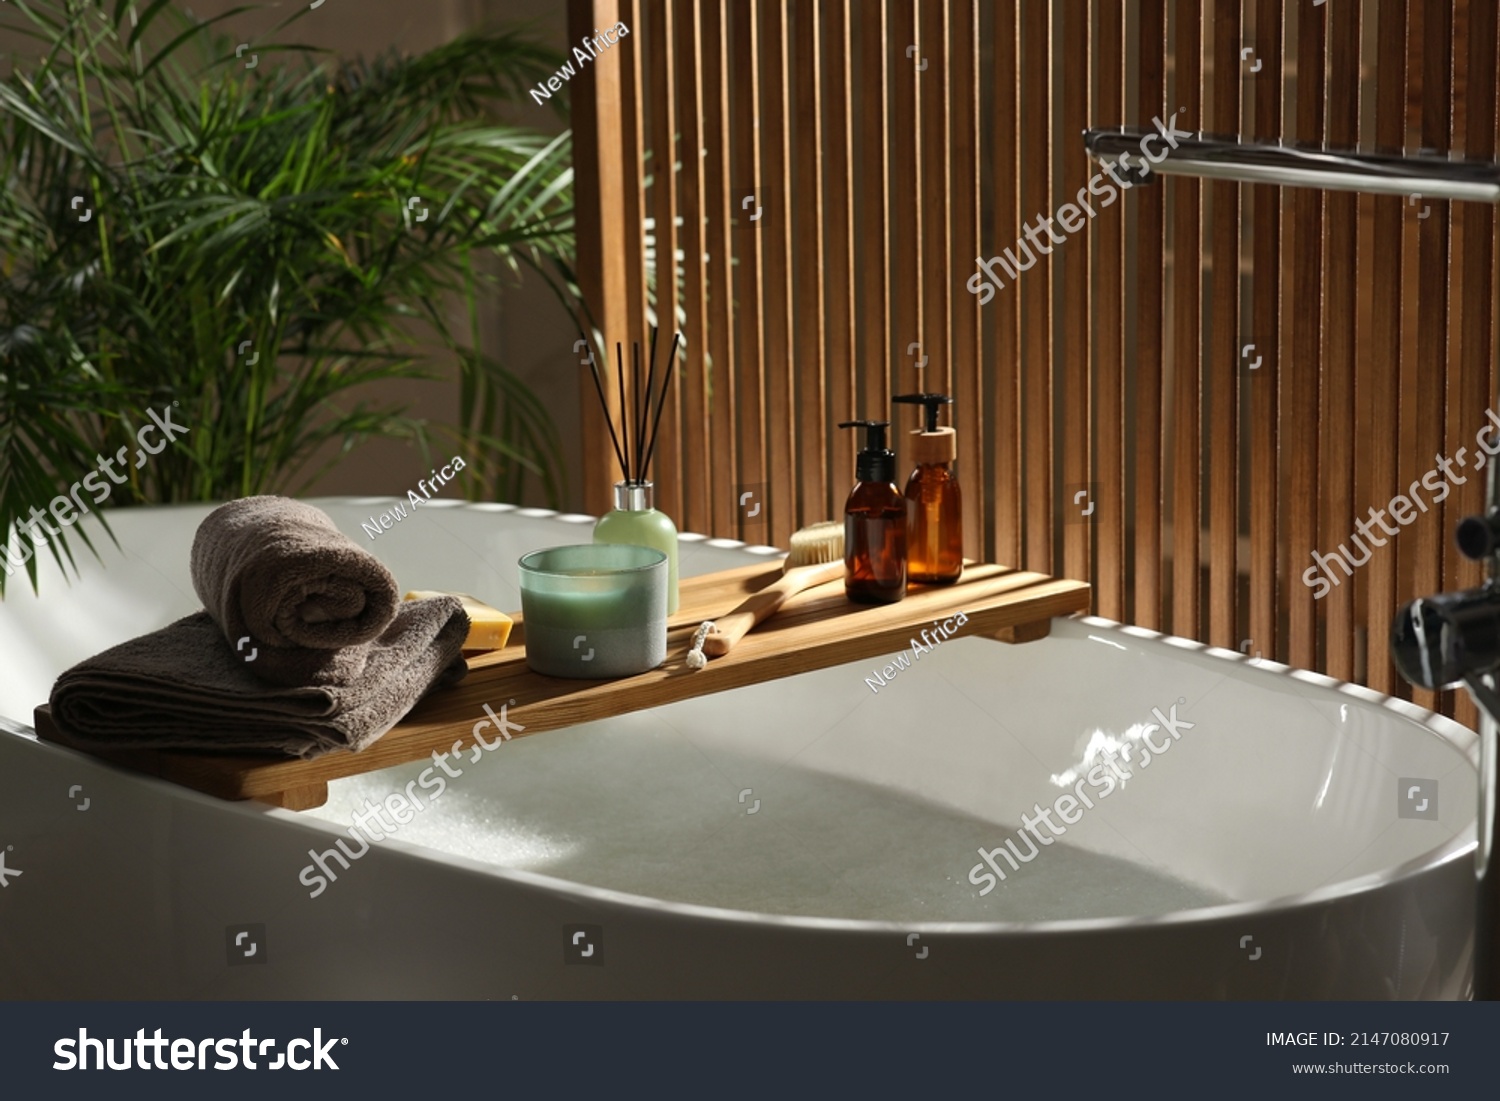 Wooden bath tray with candle, air freshener and bathroom amenities on tub indoors #2147080917